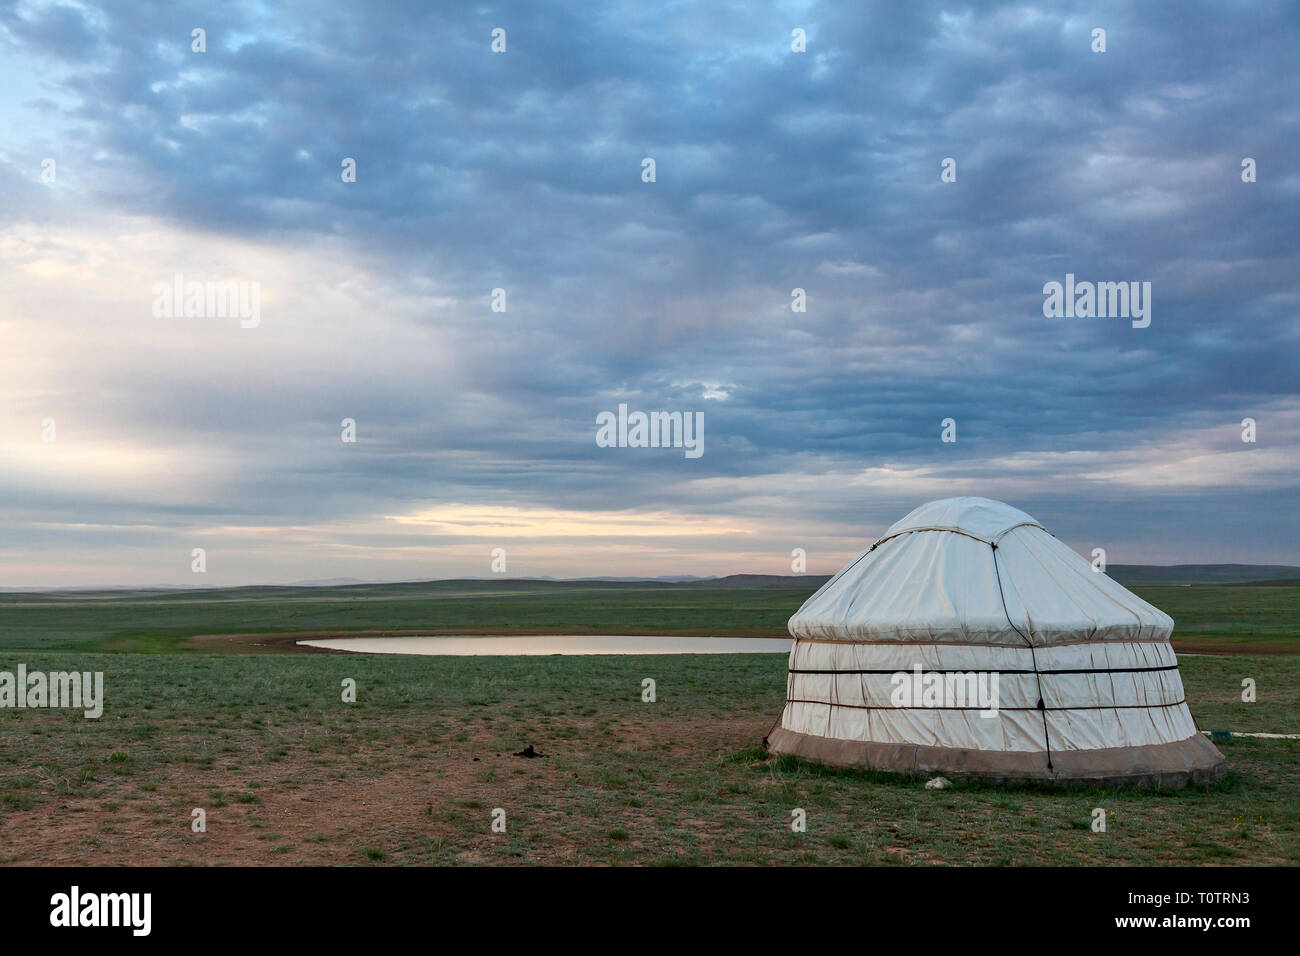 A ger (yurt) on the Gegentala grasslands north of Hohhot in Inner Mongolia, China. Stock Photo